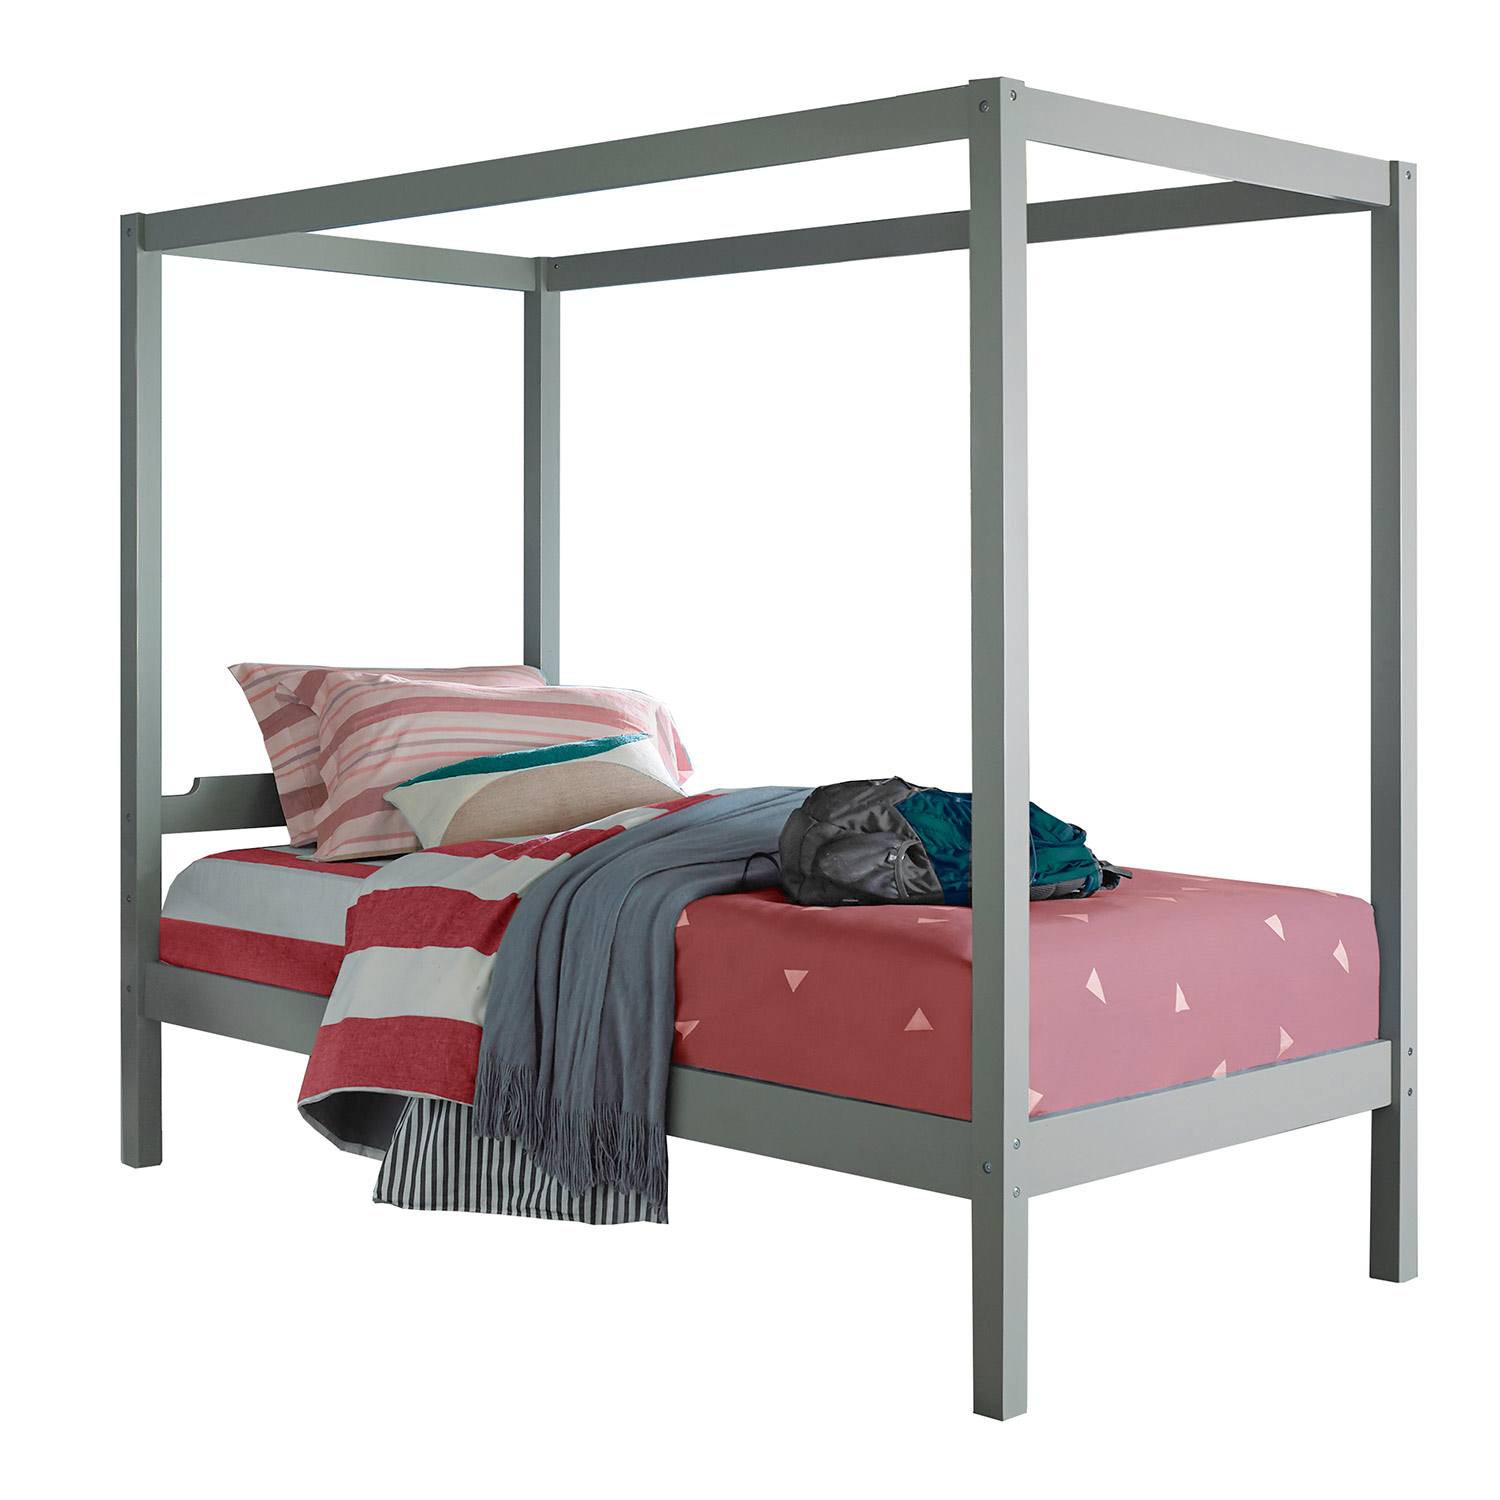 Hillsdale Sutton Wood Canopy Twin Bed - Gray